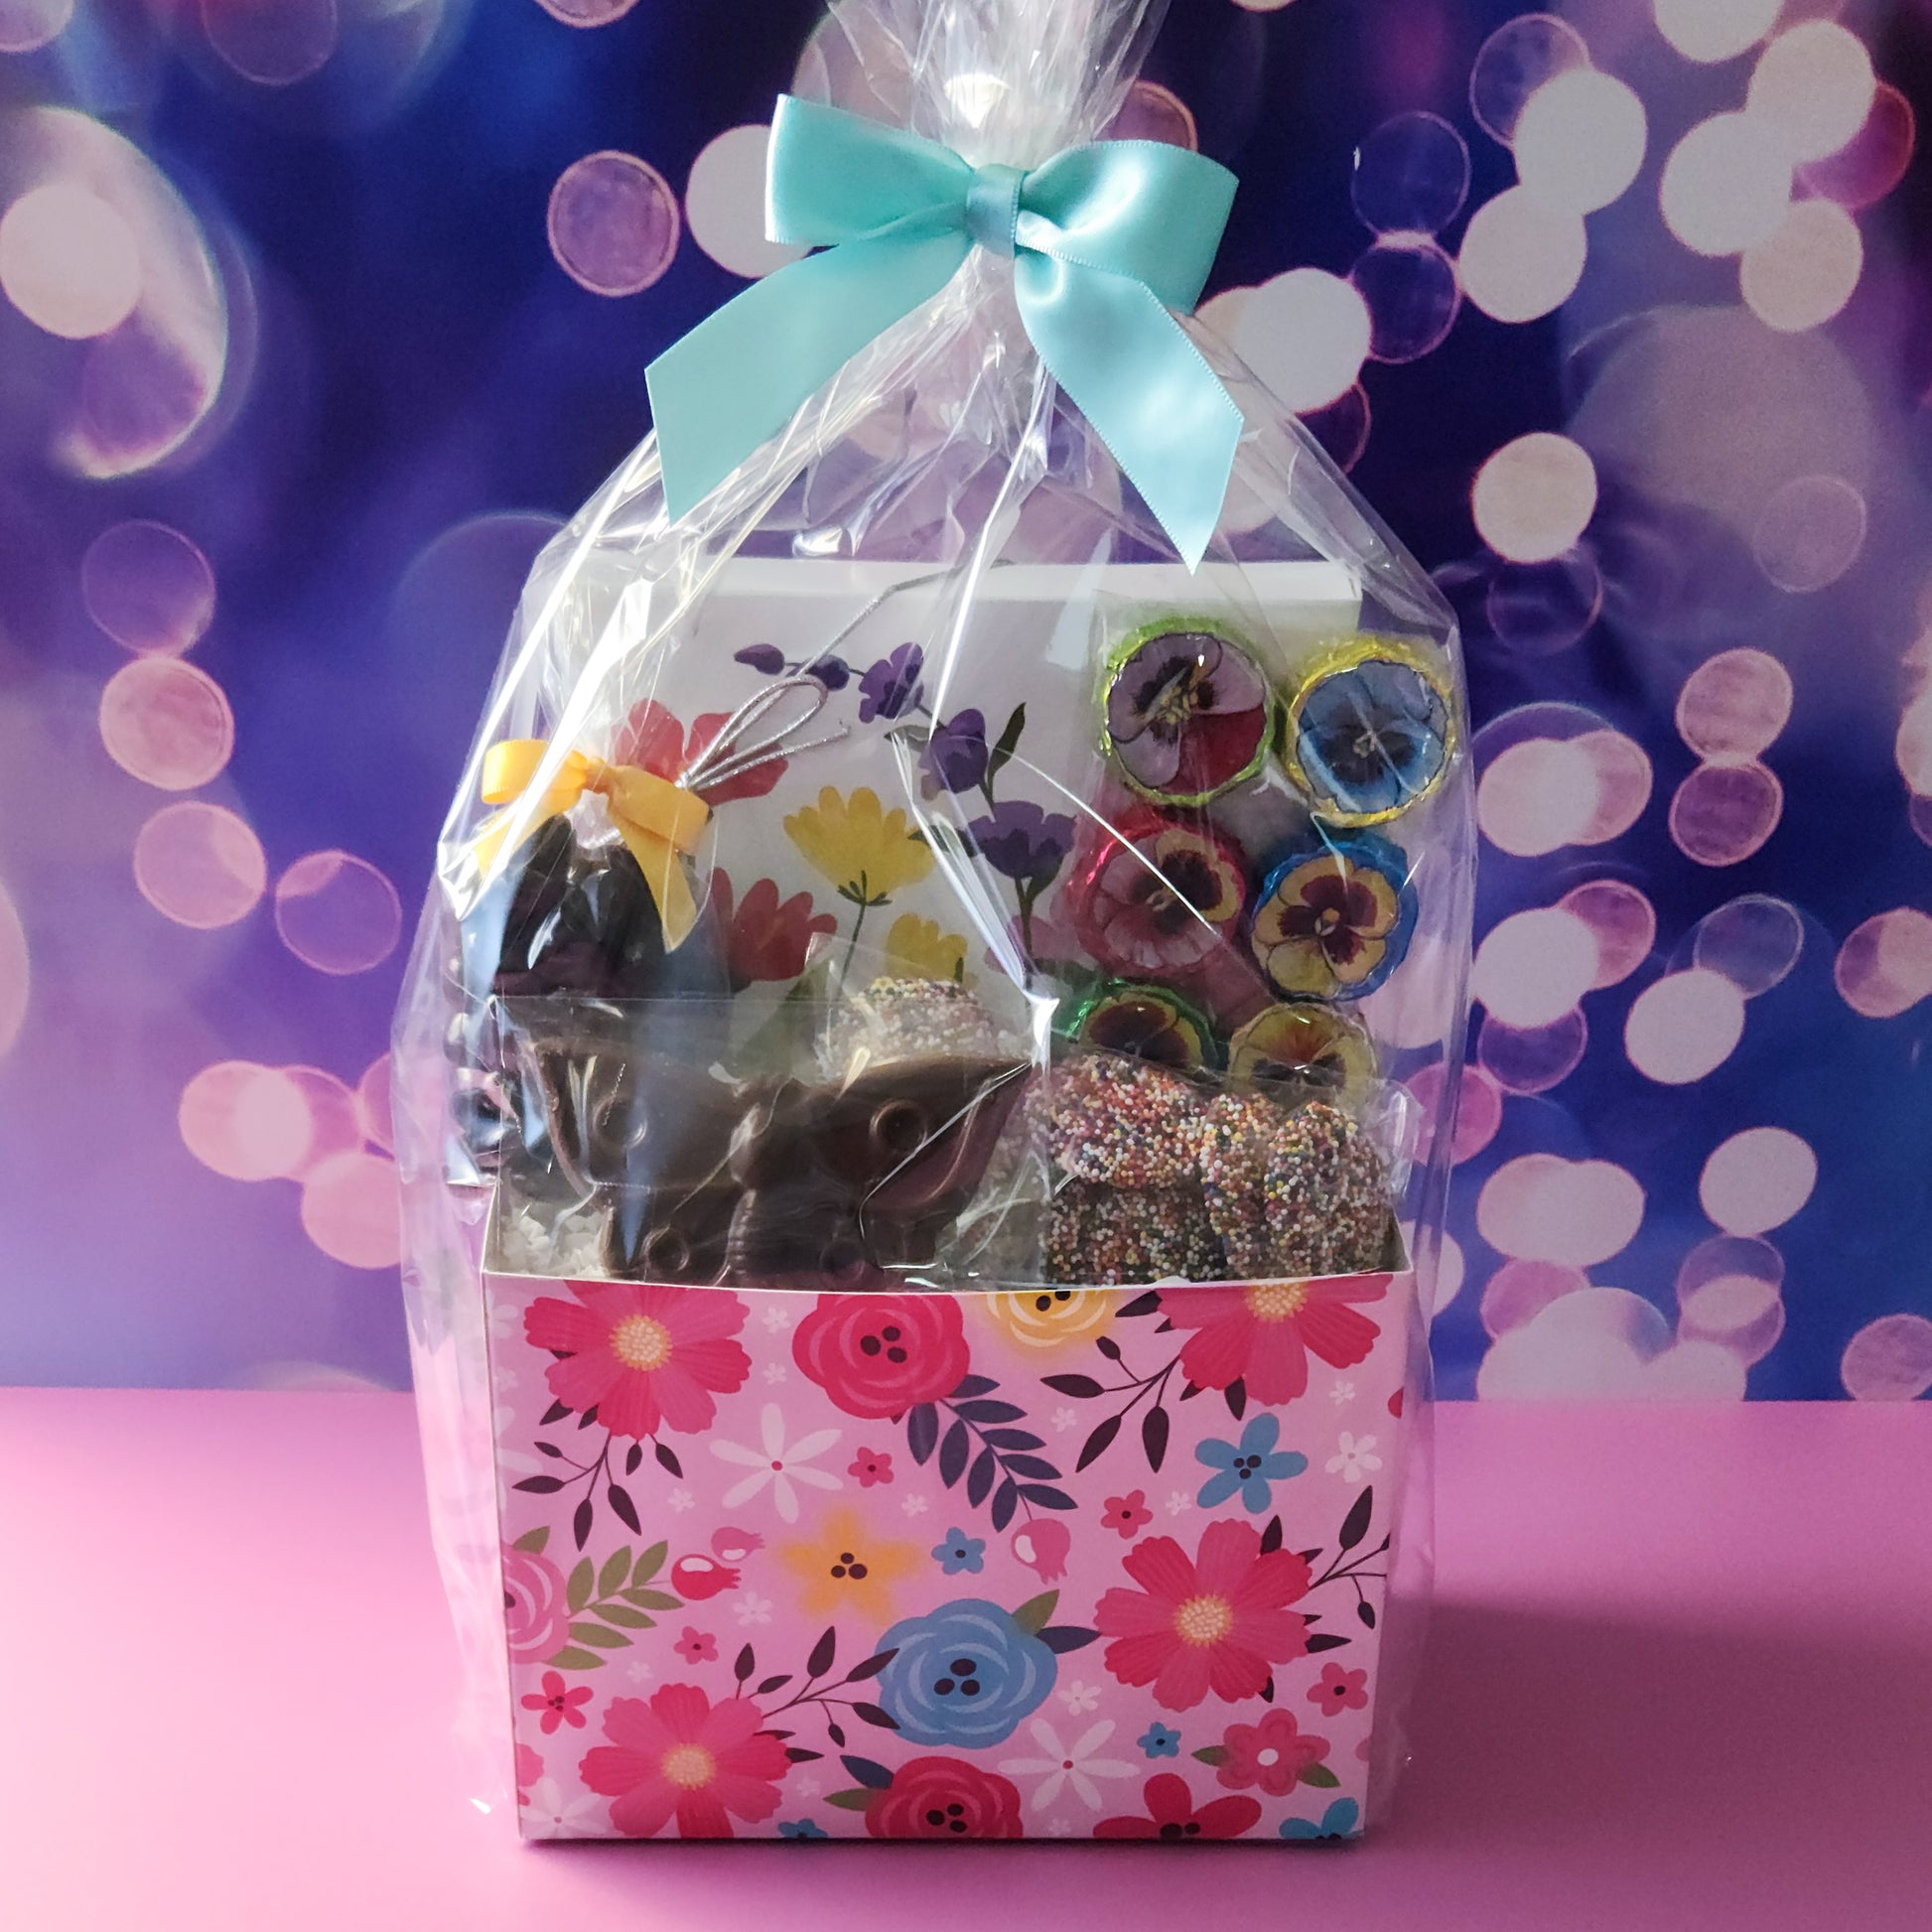 A chocolate gift basket with a floral theme. Perfect for any occasion.